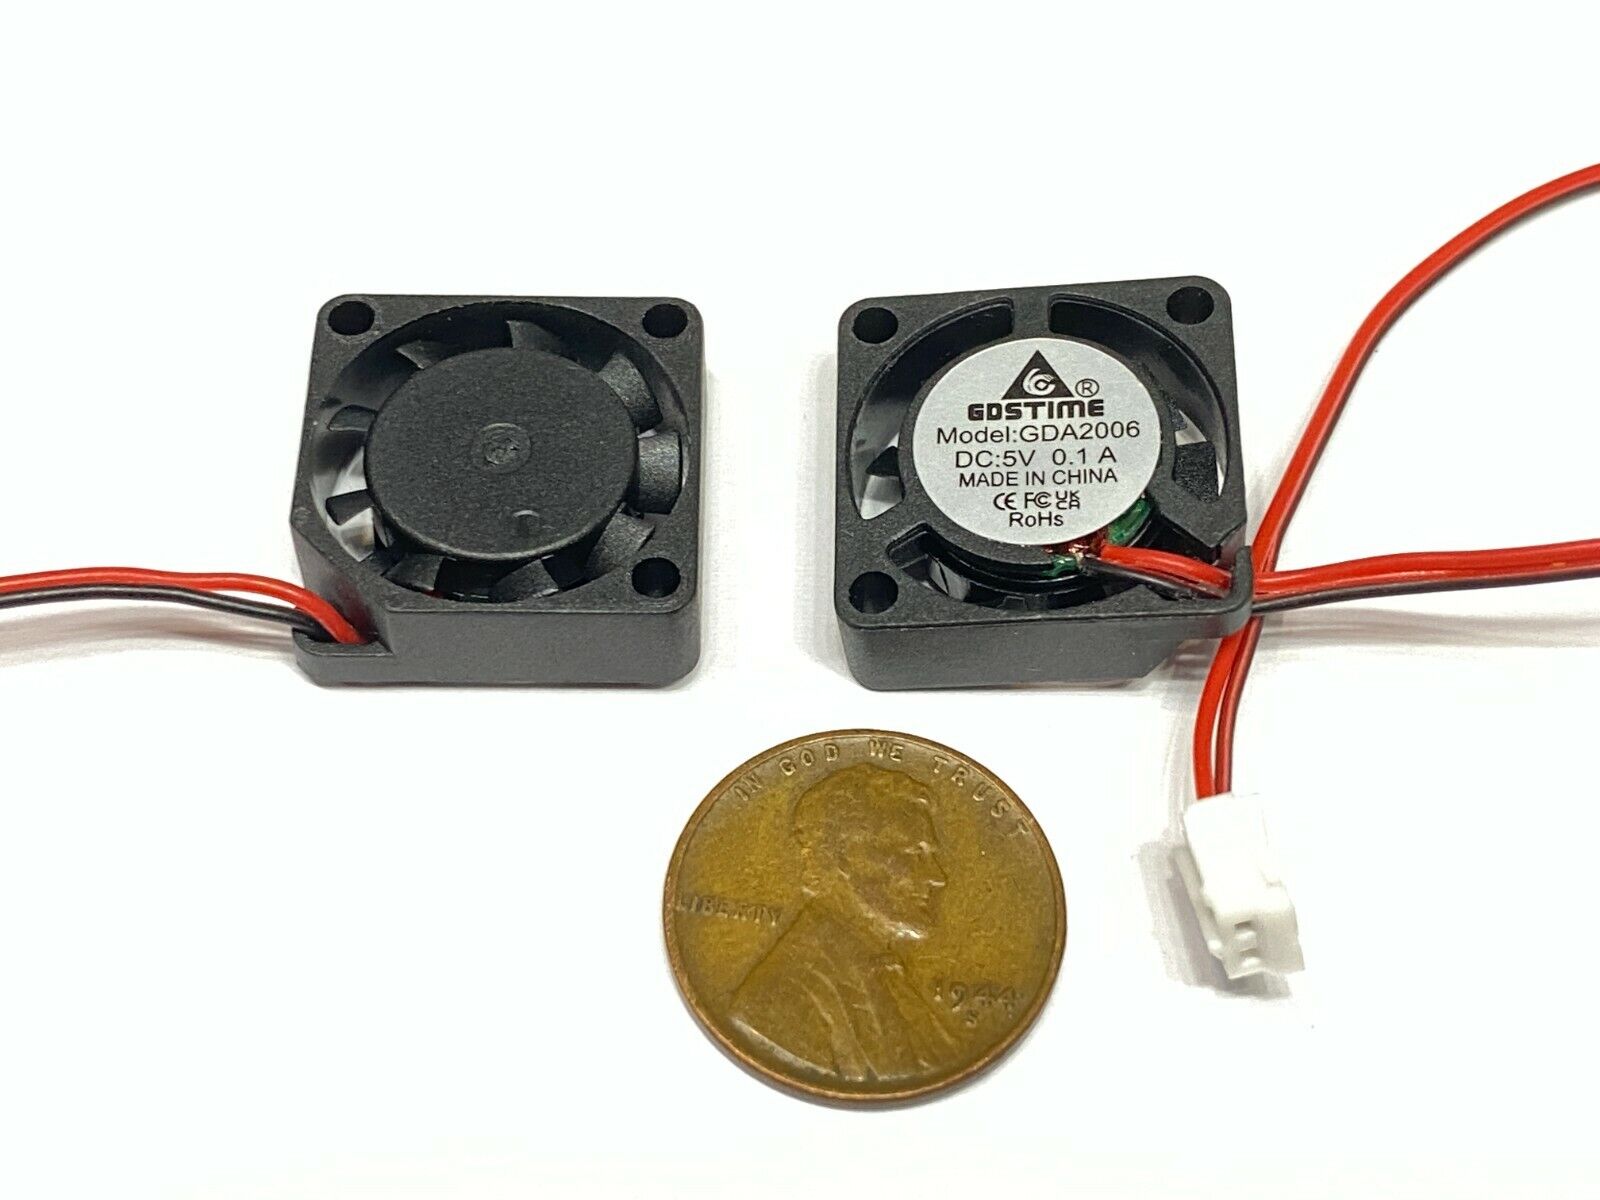 2 Pieces 2006 micro Small 5V DC Cooling Fan 20mm 6mm 2 Pin Mini axial 2cm